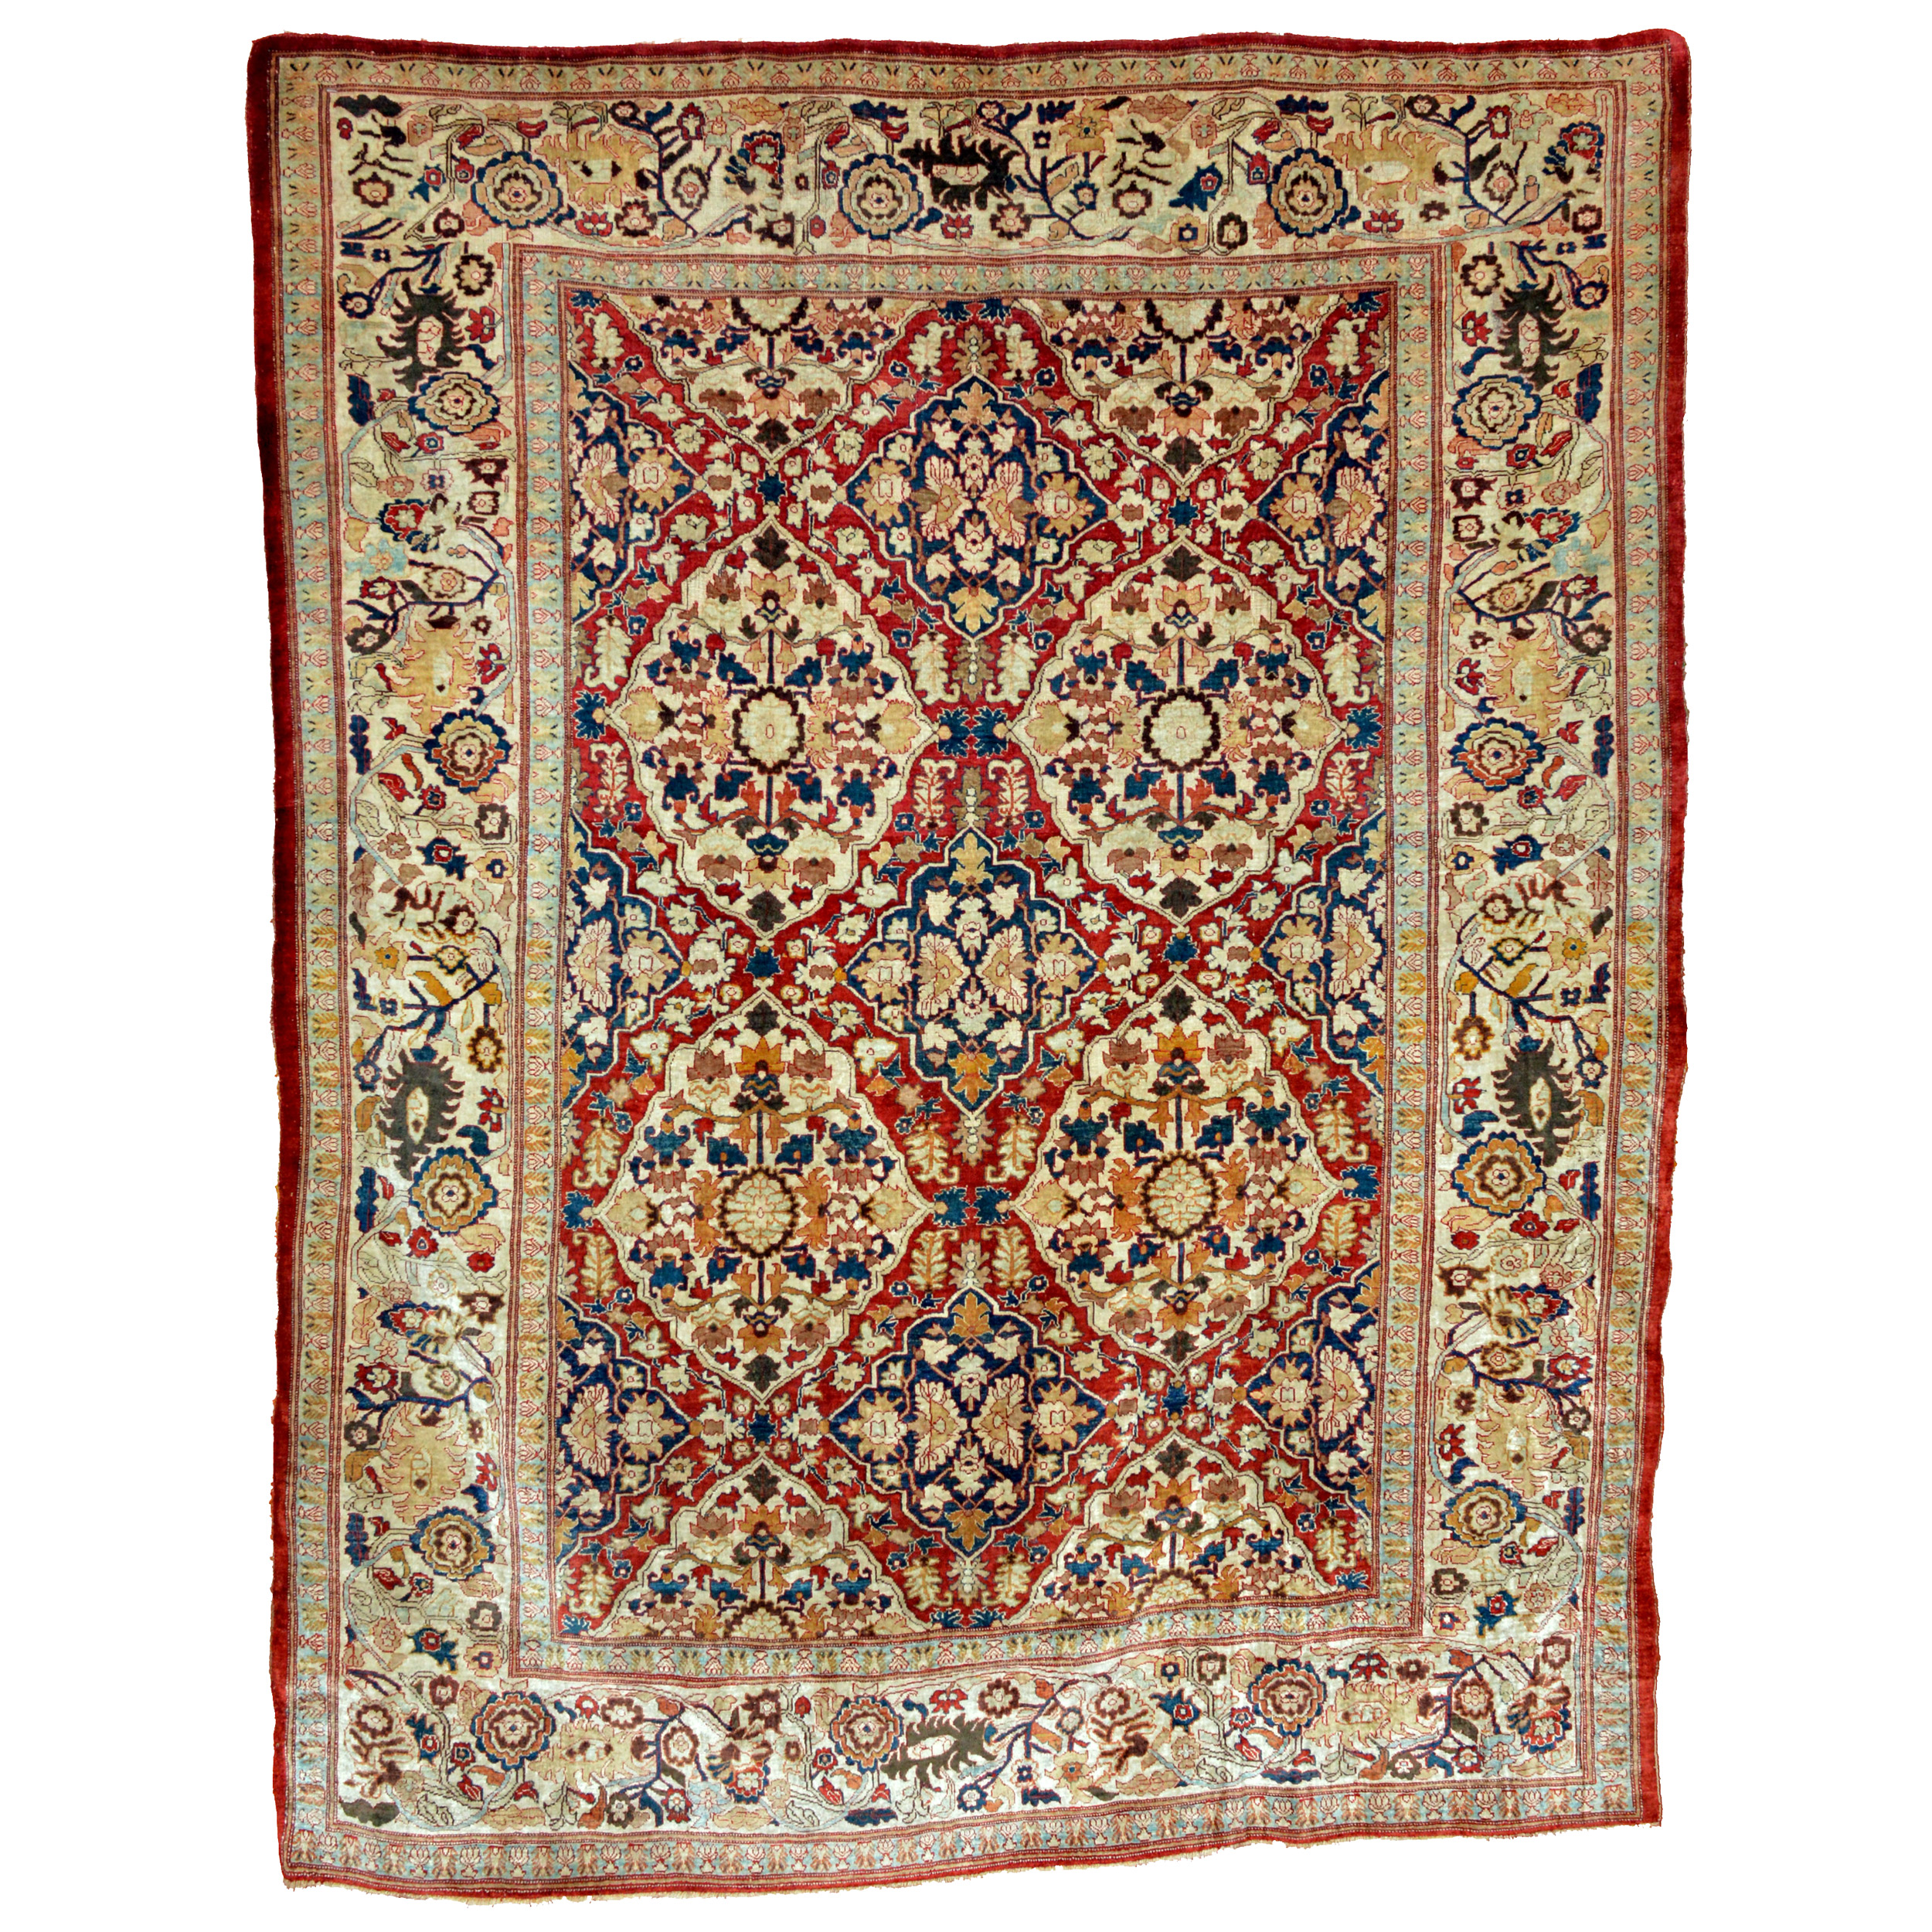 Antique Persian silk Heriz or Tabriz with an ivory and burgundy panel design, Douglas Stock Gallery, antique Persian rugs Boston,MA area